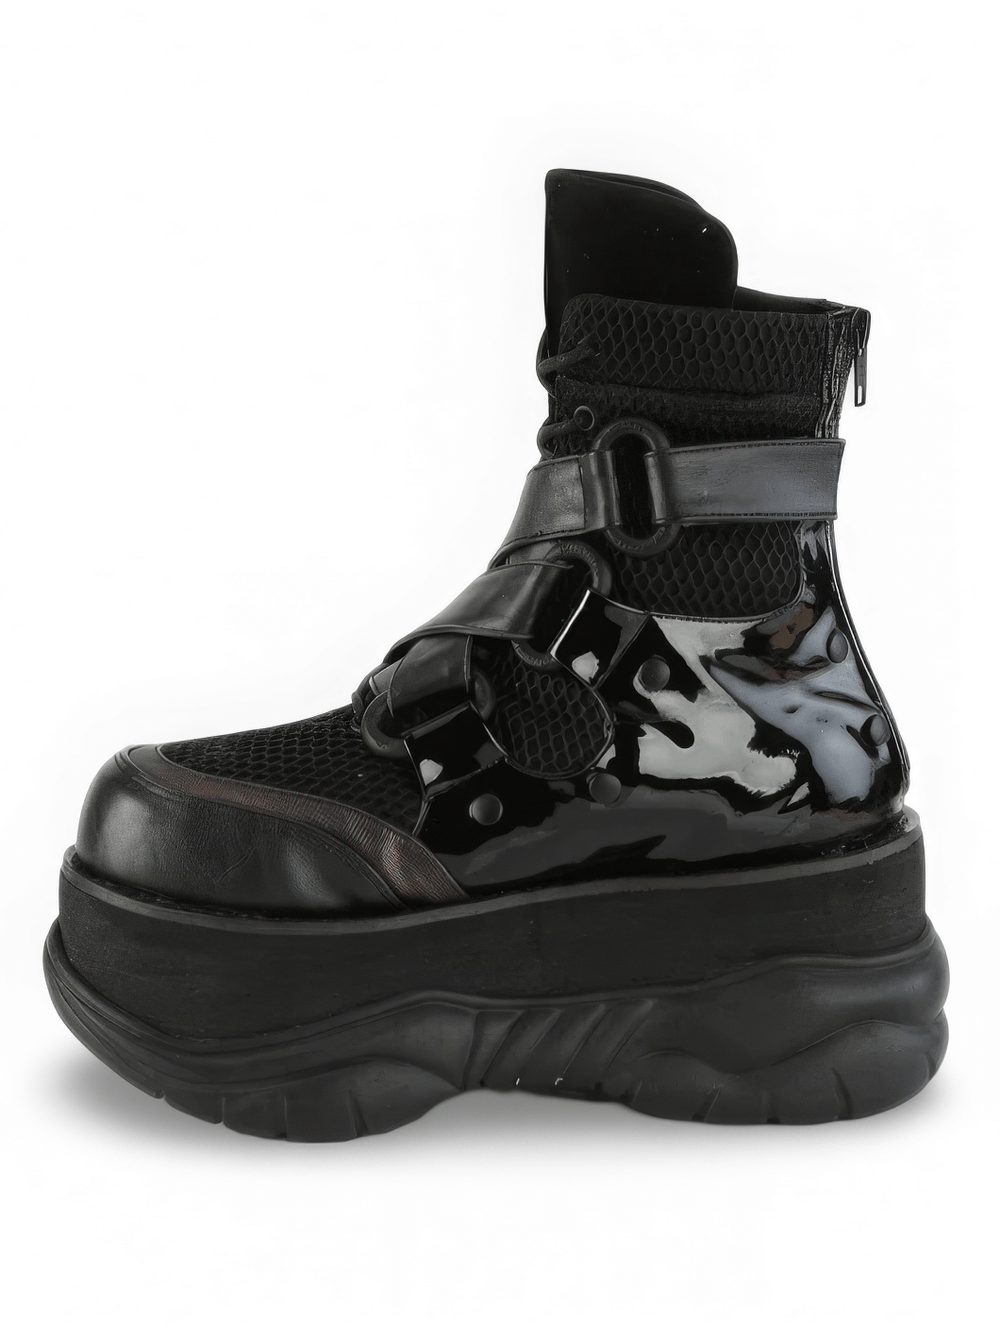 DEMONIA Cyberpunk Ankle Boots with Criss-Cross Straps